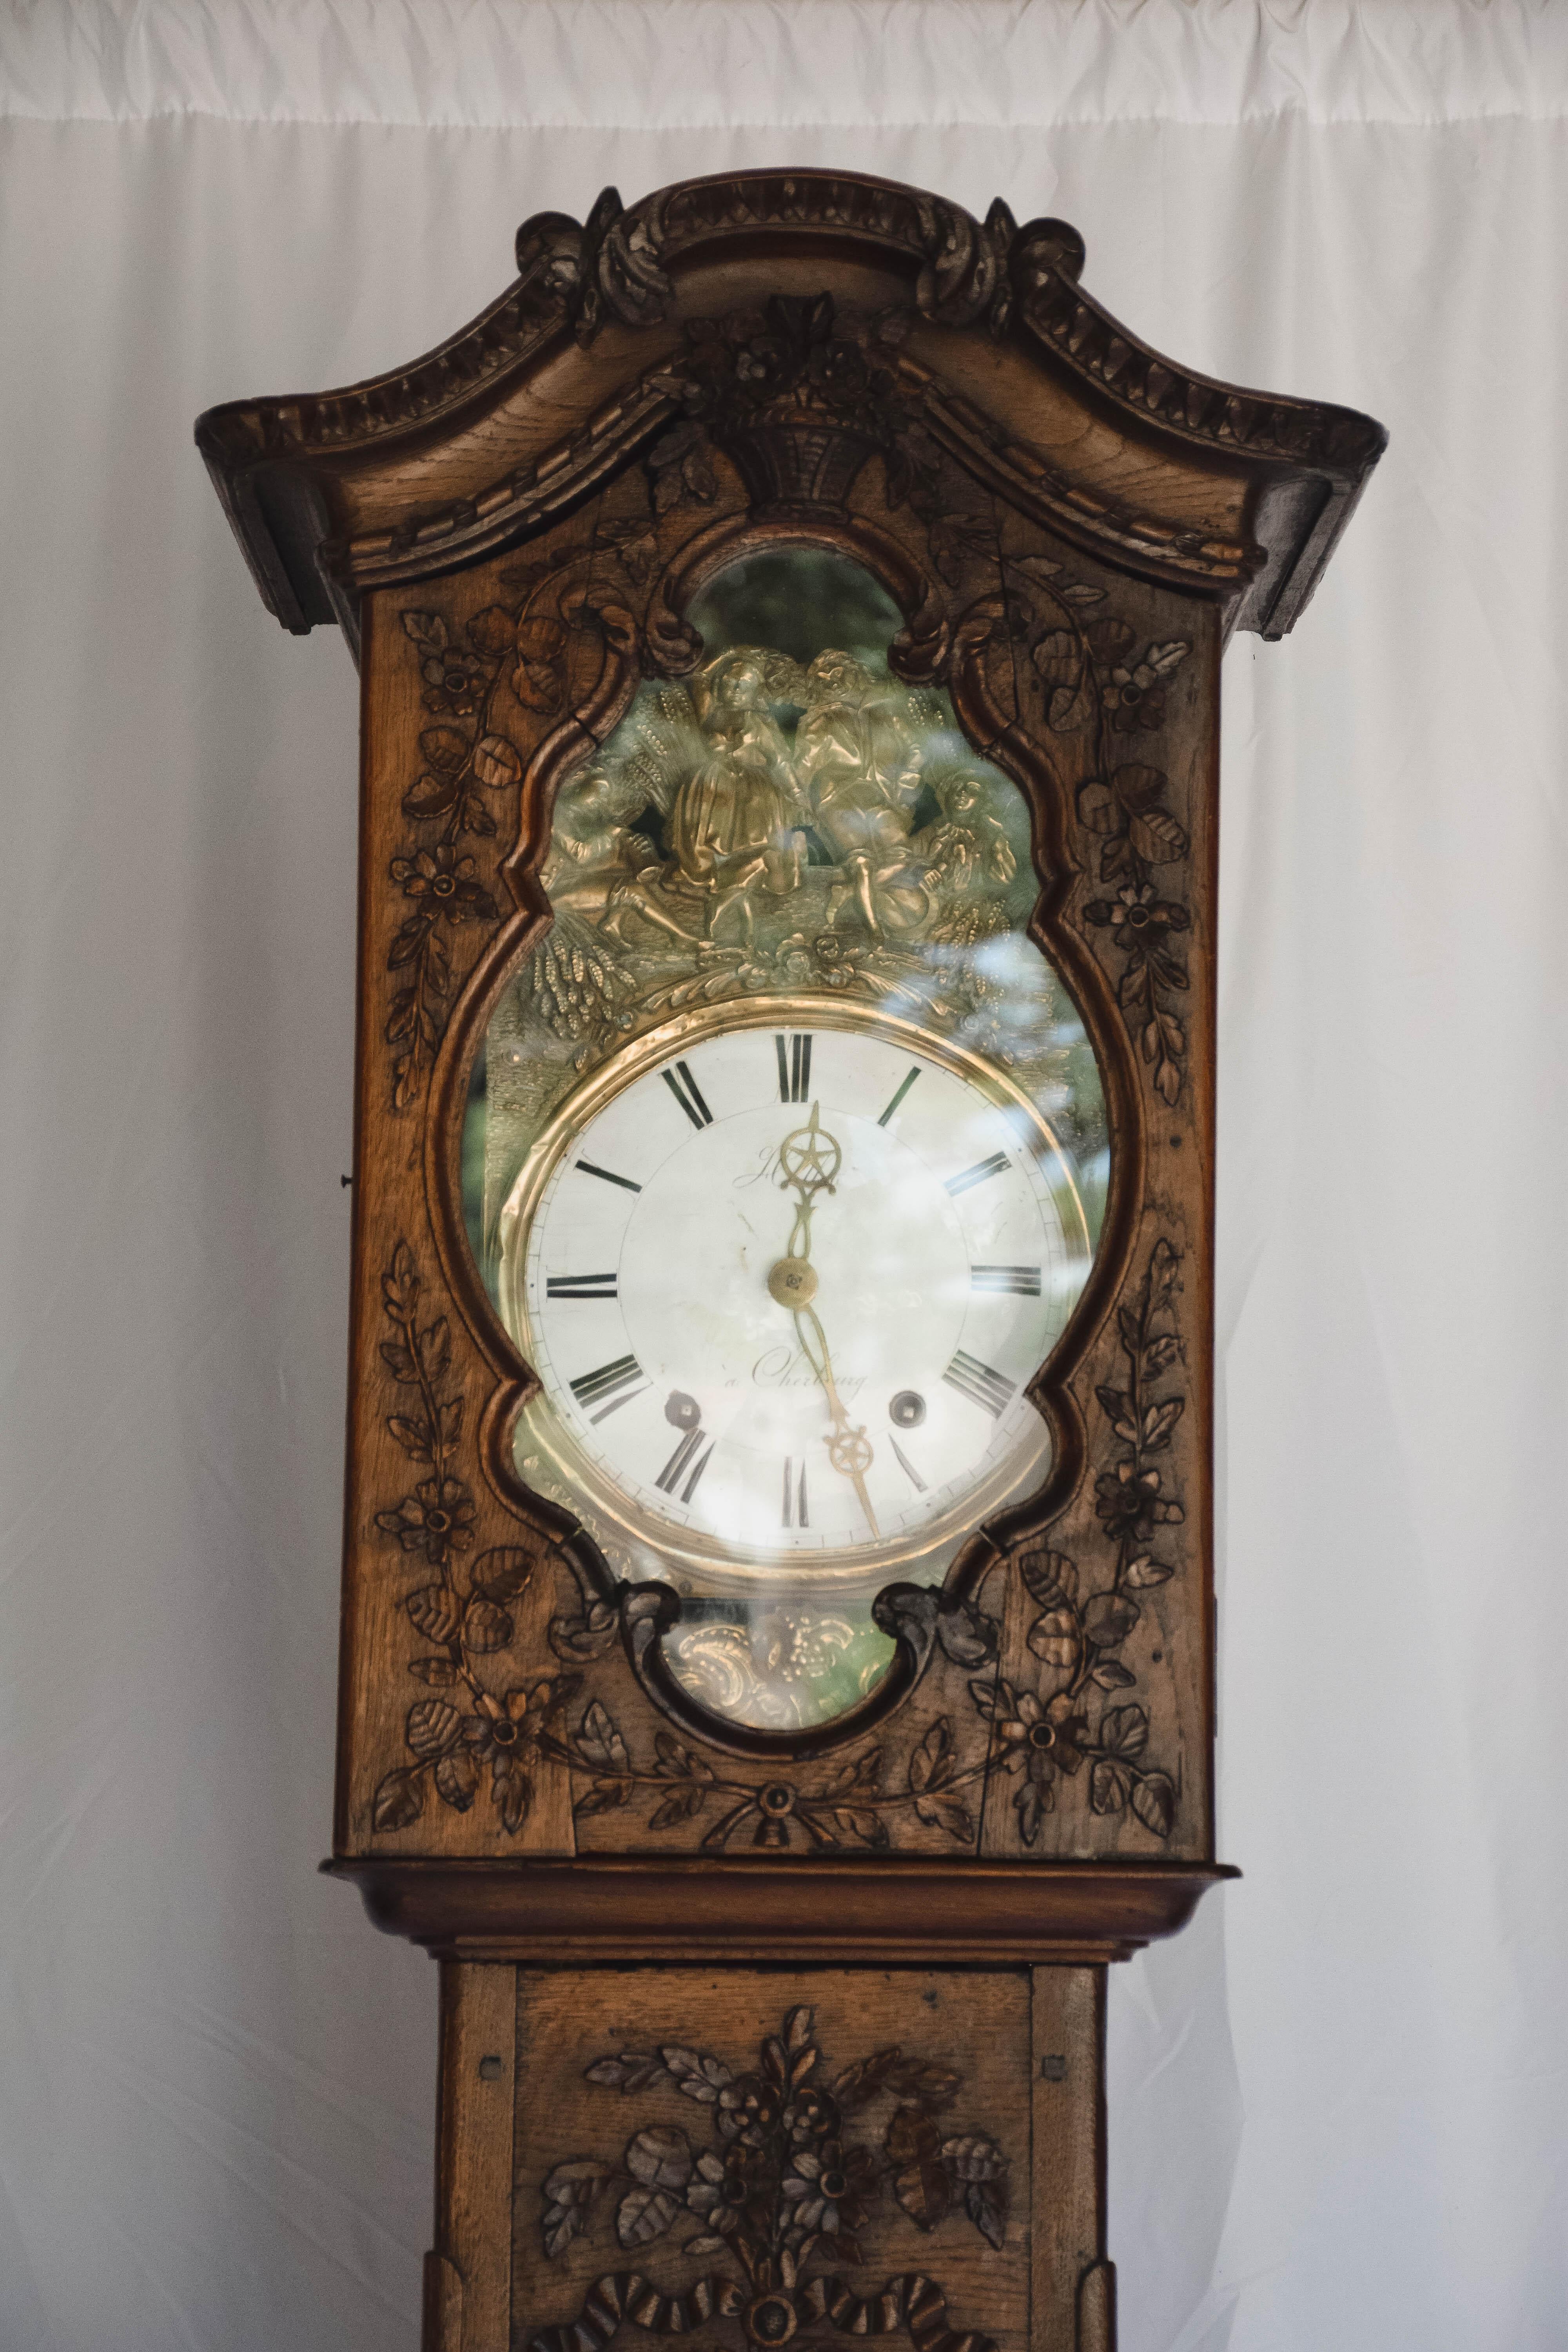 Found in Northern France, this wonderful 18th c. Longcase (grandfather) from the Normandy region of France is truly a special find.  Beautifully detailed, the exterior is carved with a floral and foliage motif sitting on cabriolet feet. The face of